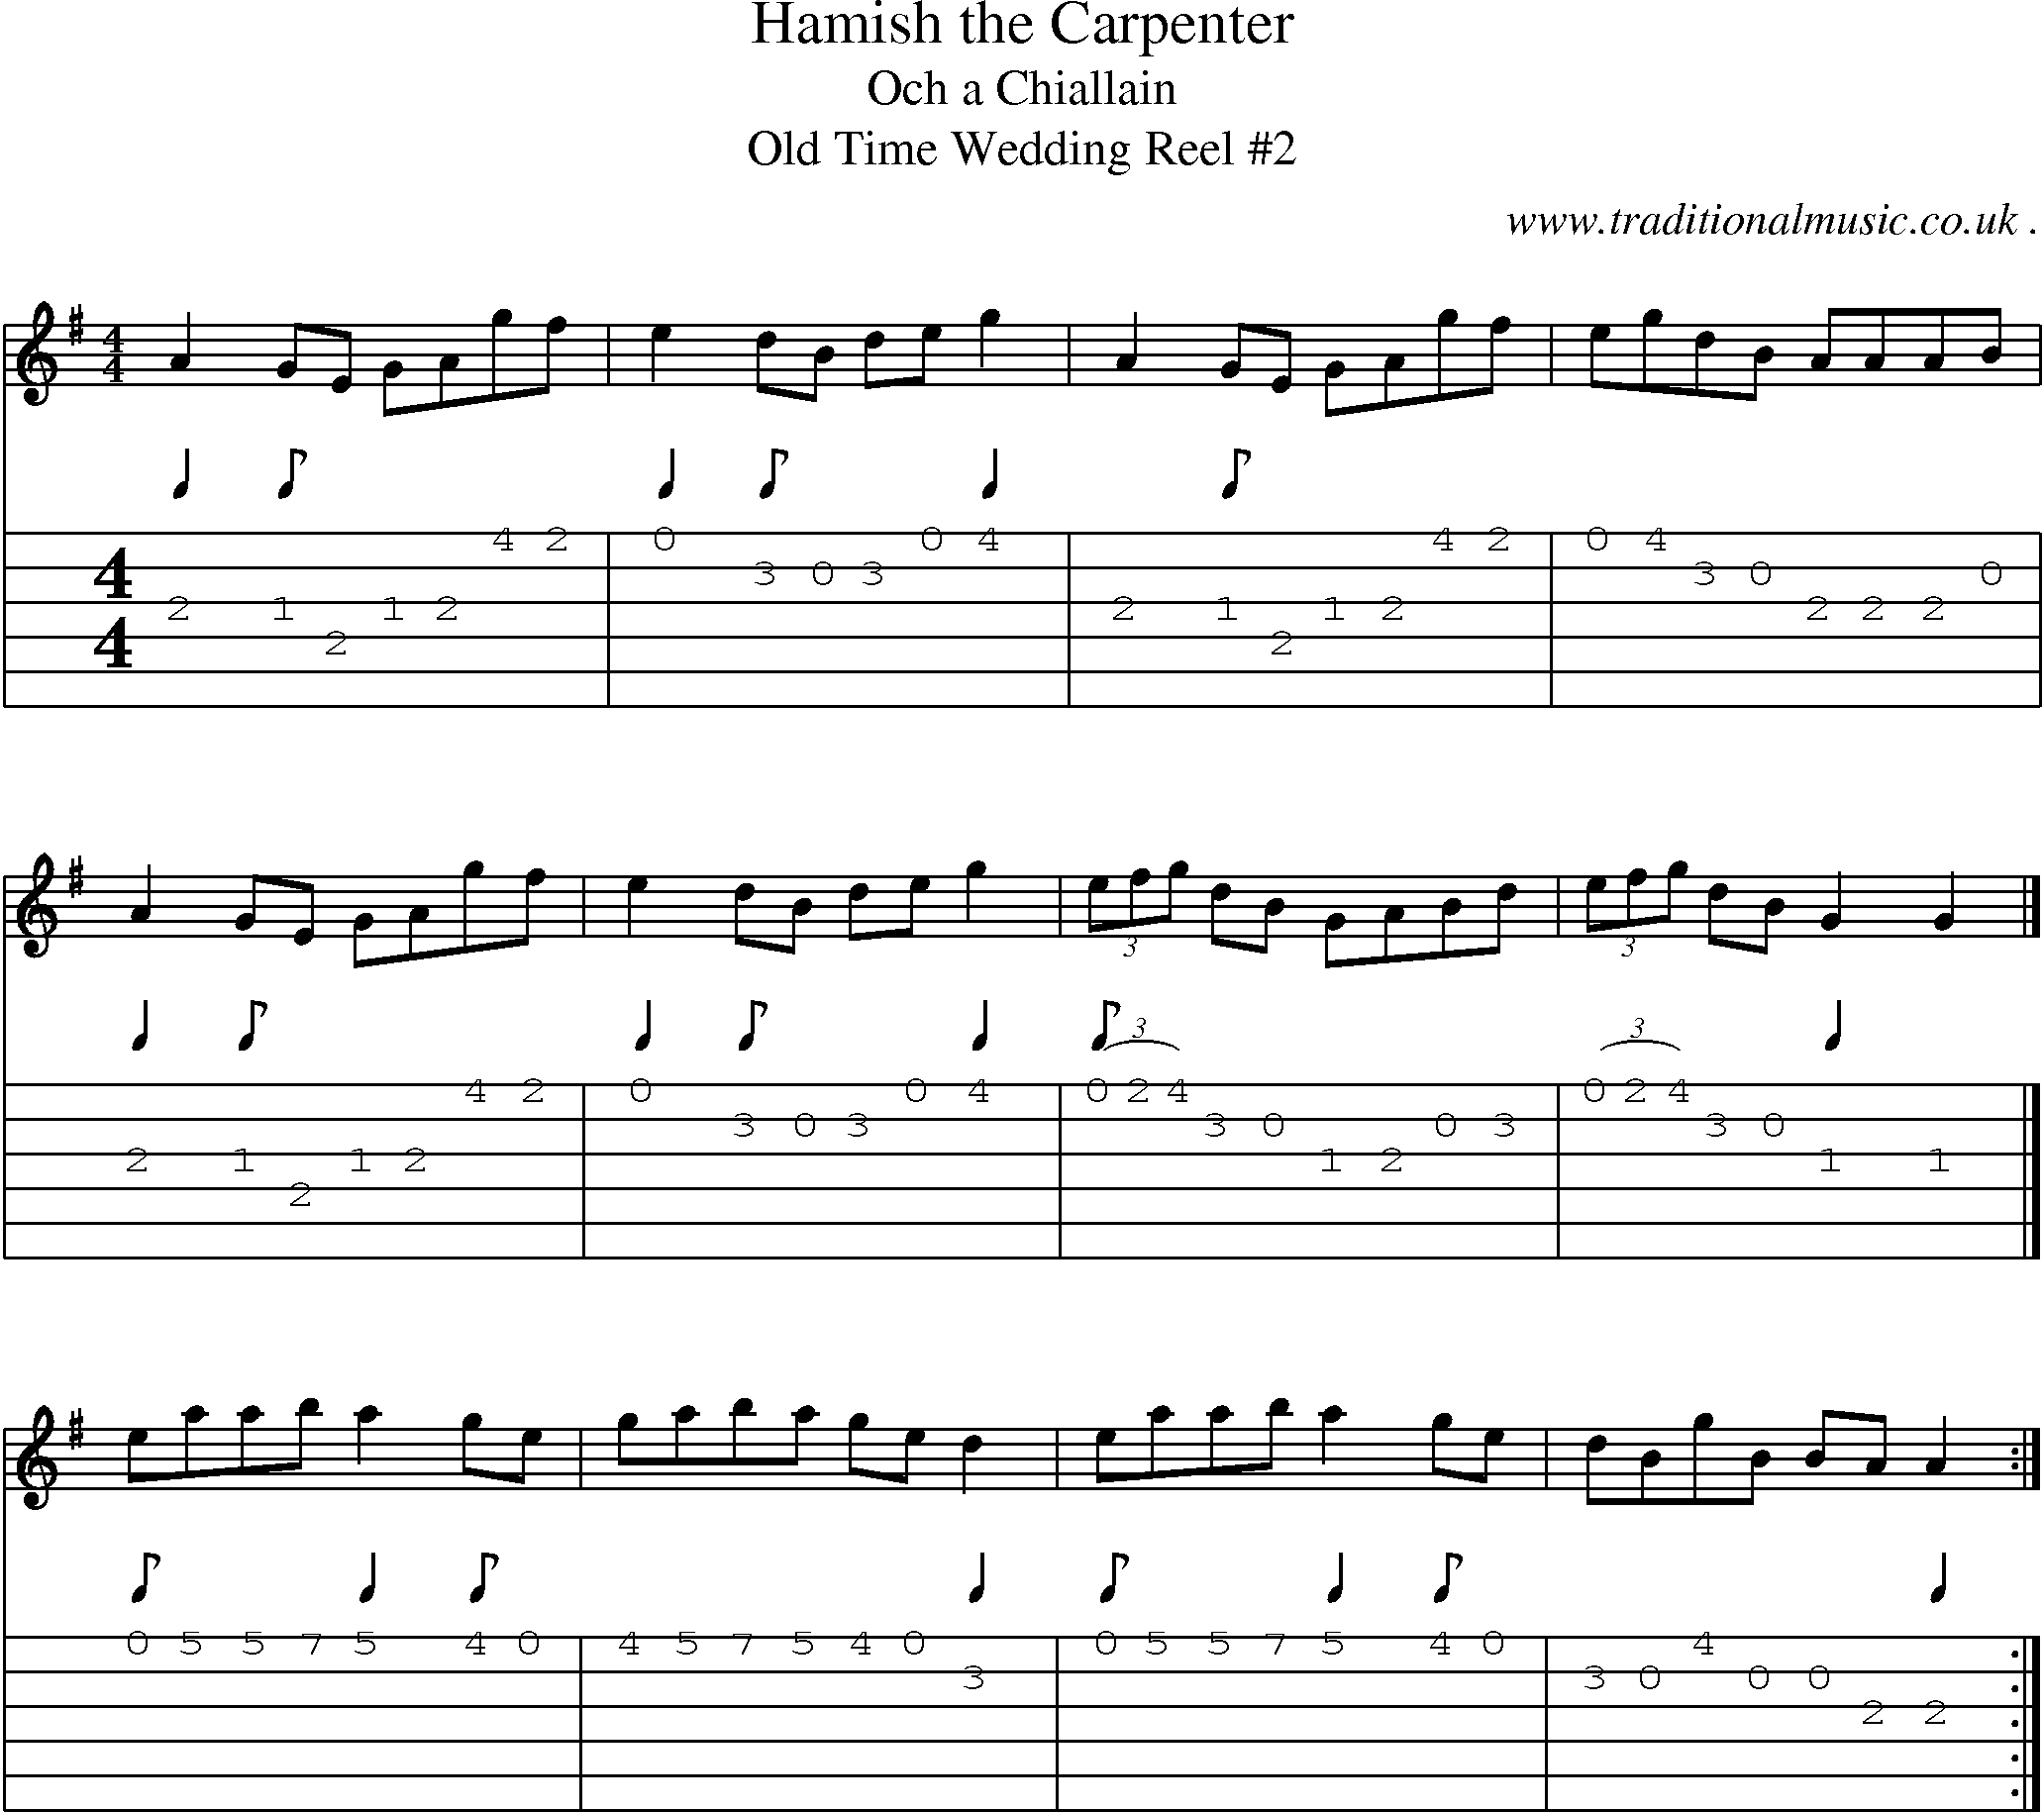 Sheet-music  score, Chords and Guitar Tabs for Hamish The Carpenter